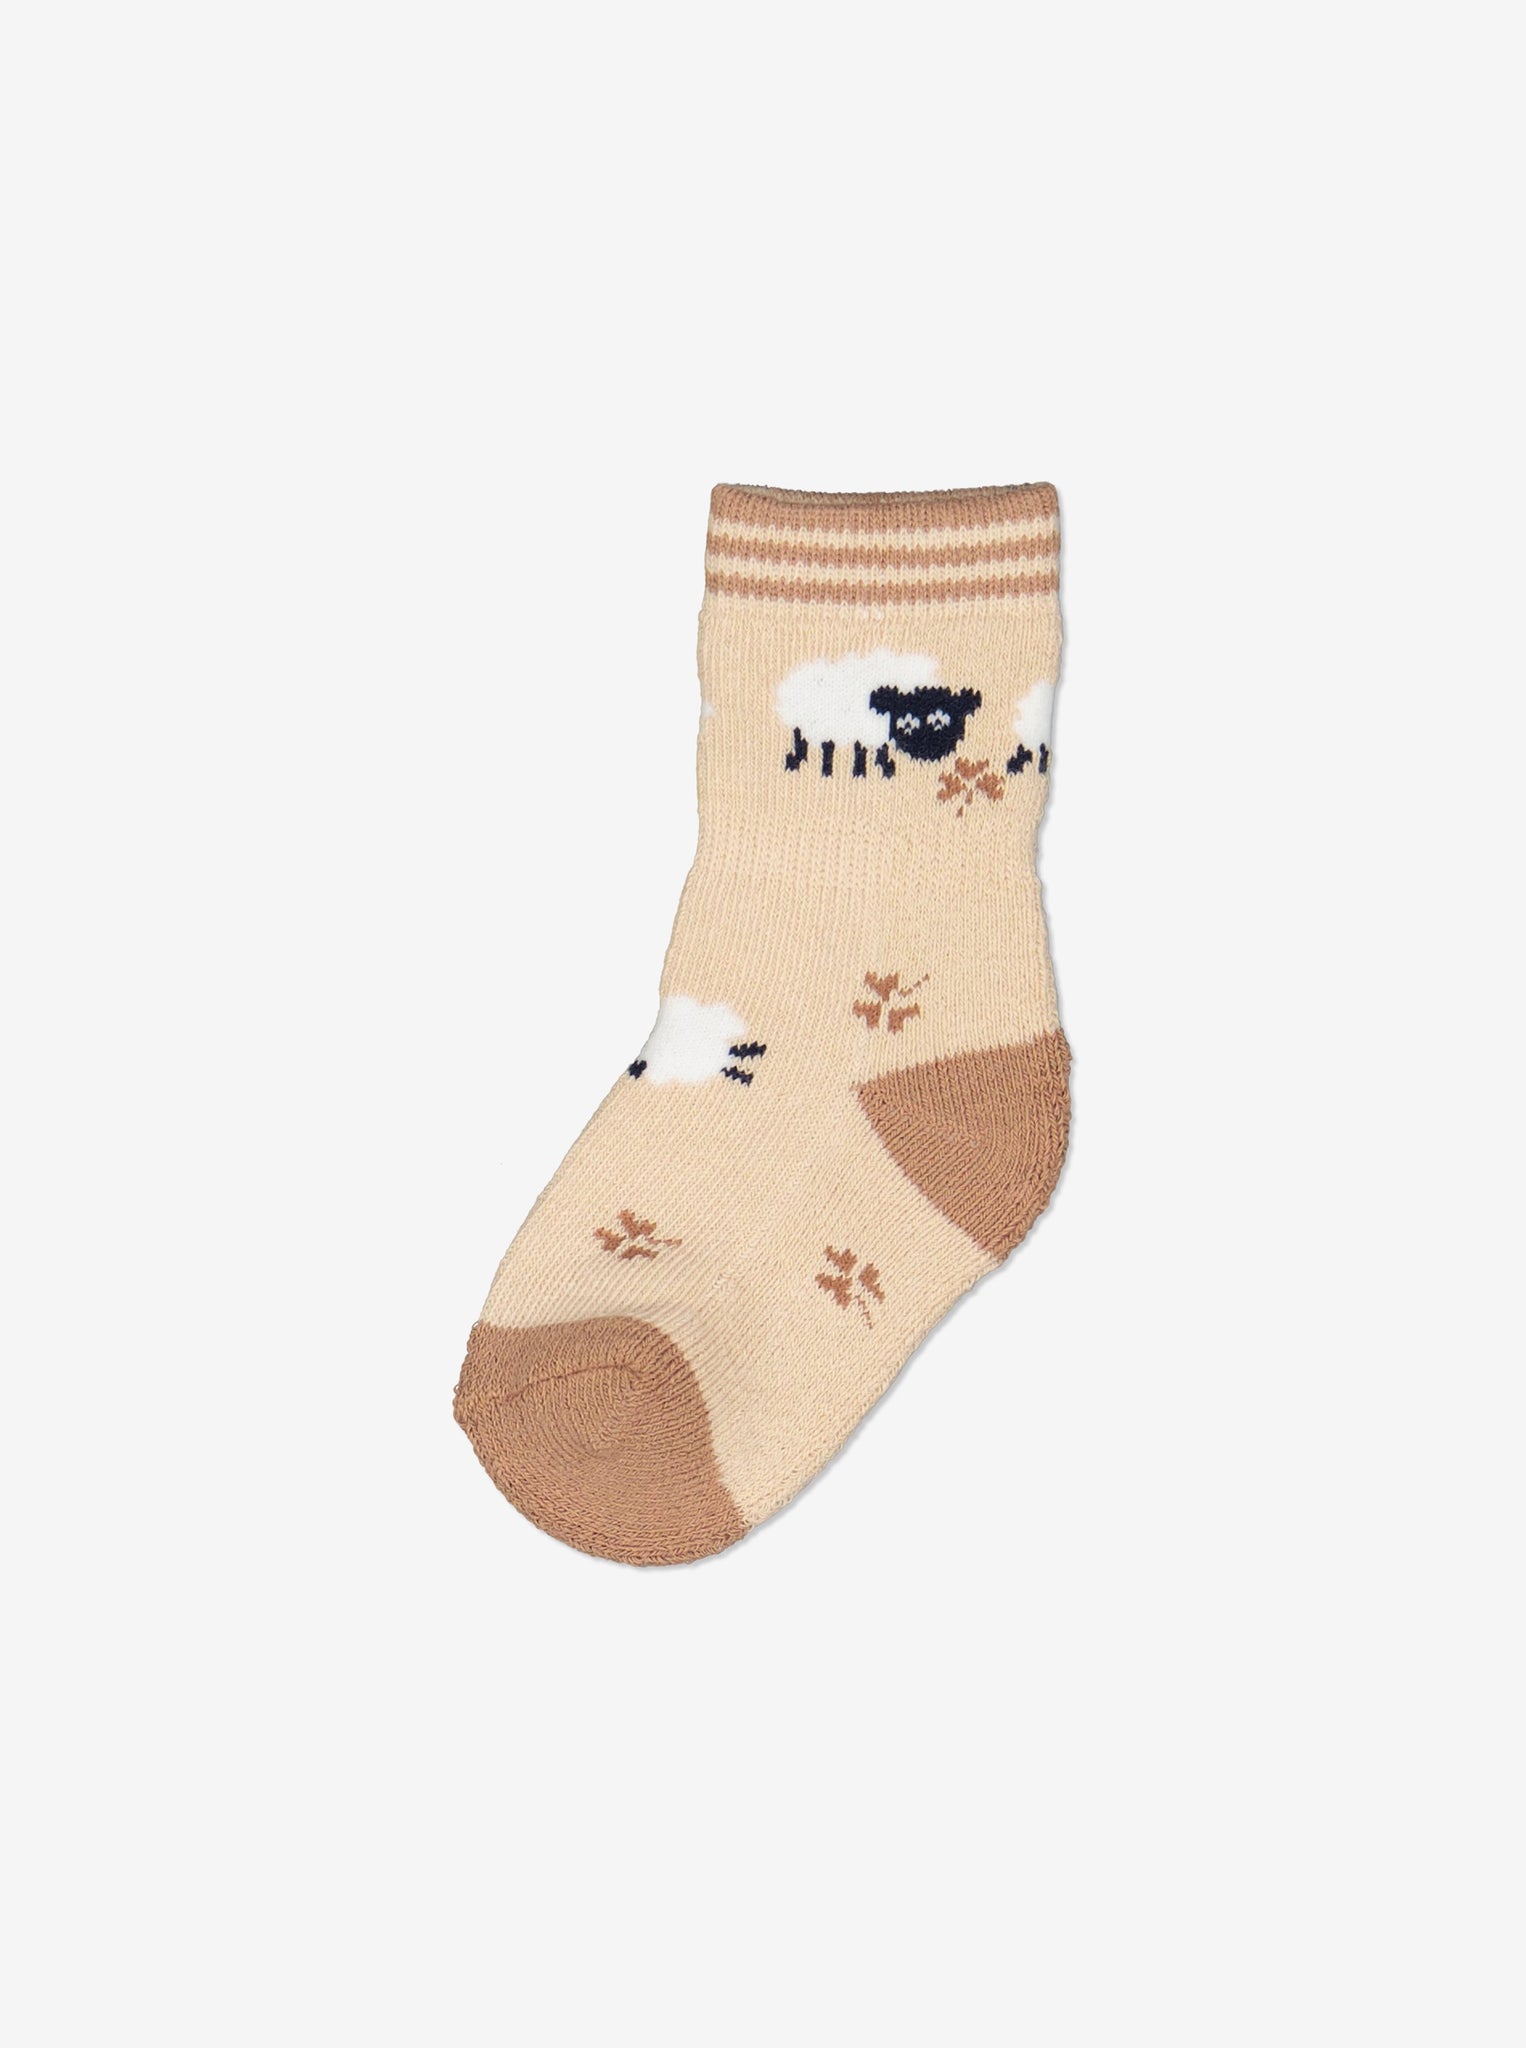  Organic Beige Newborn Baby Socks from Polarn O. Pyret Kidswear. Made from sustainable materials.